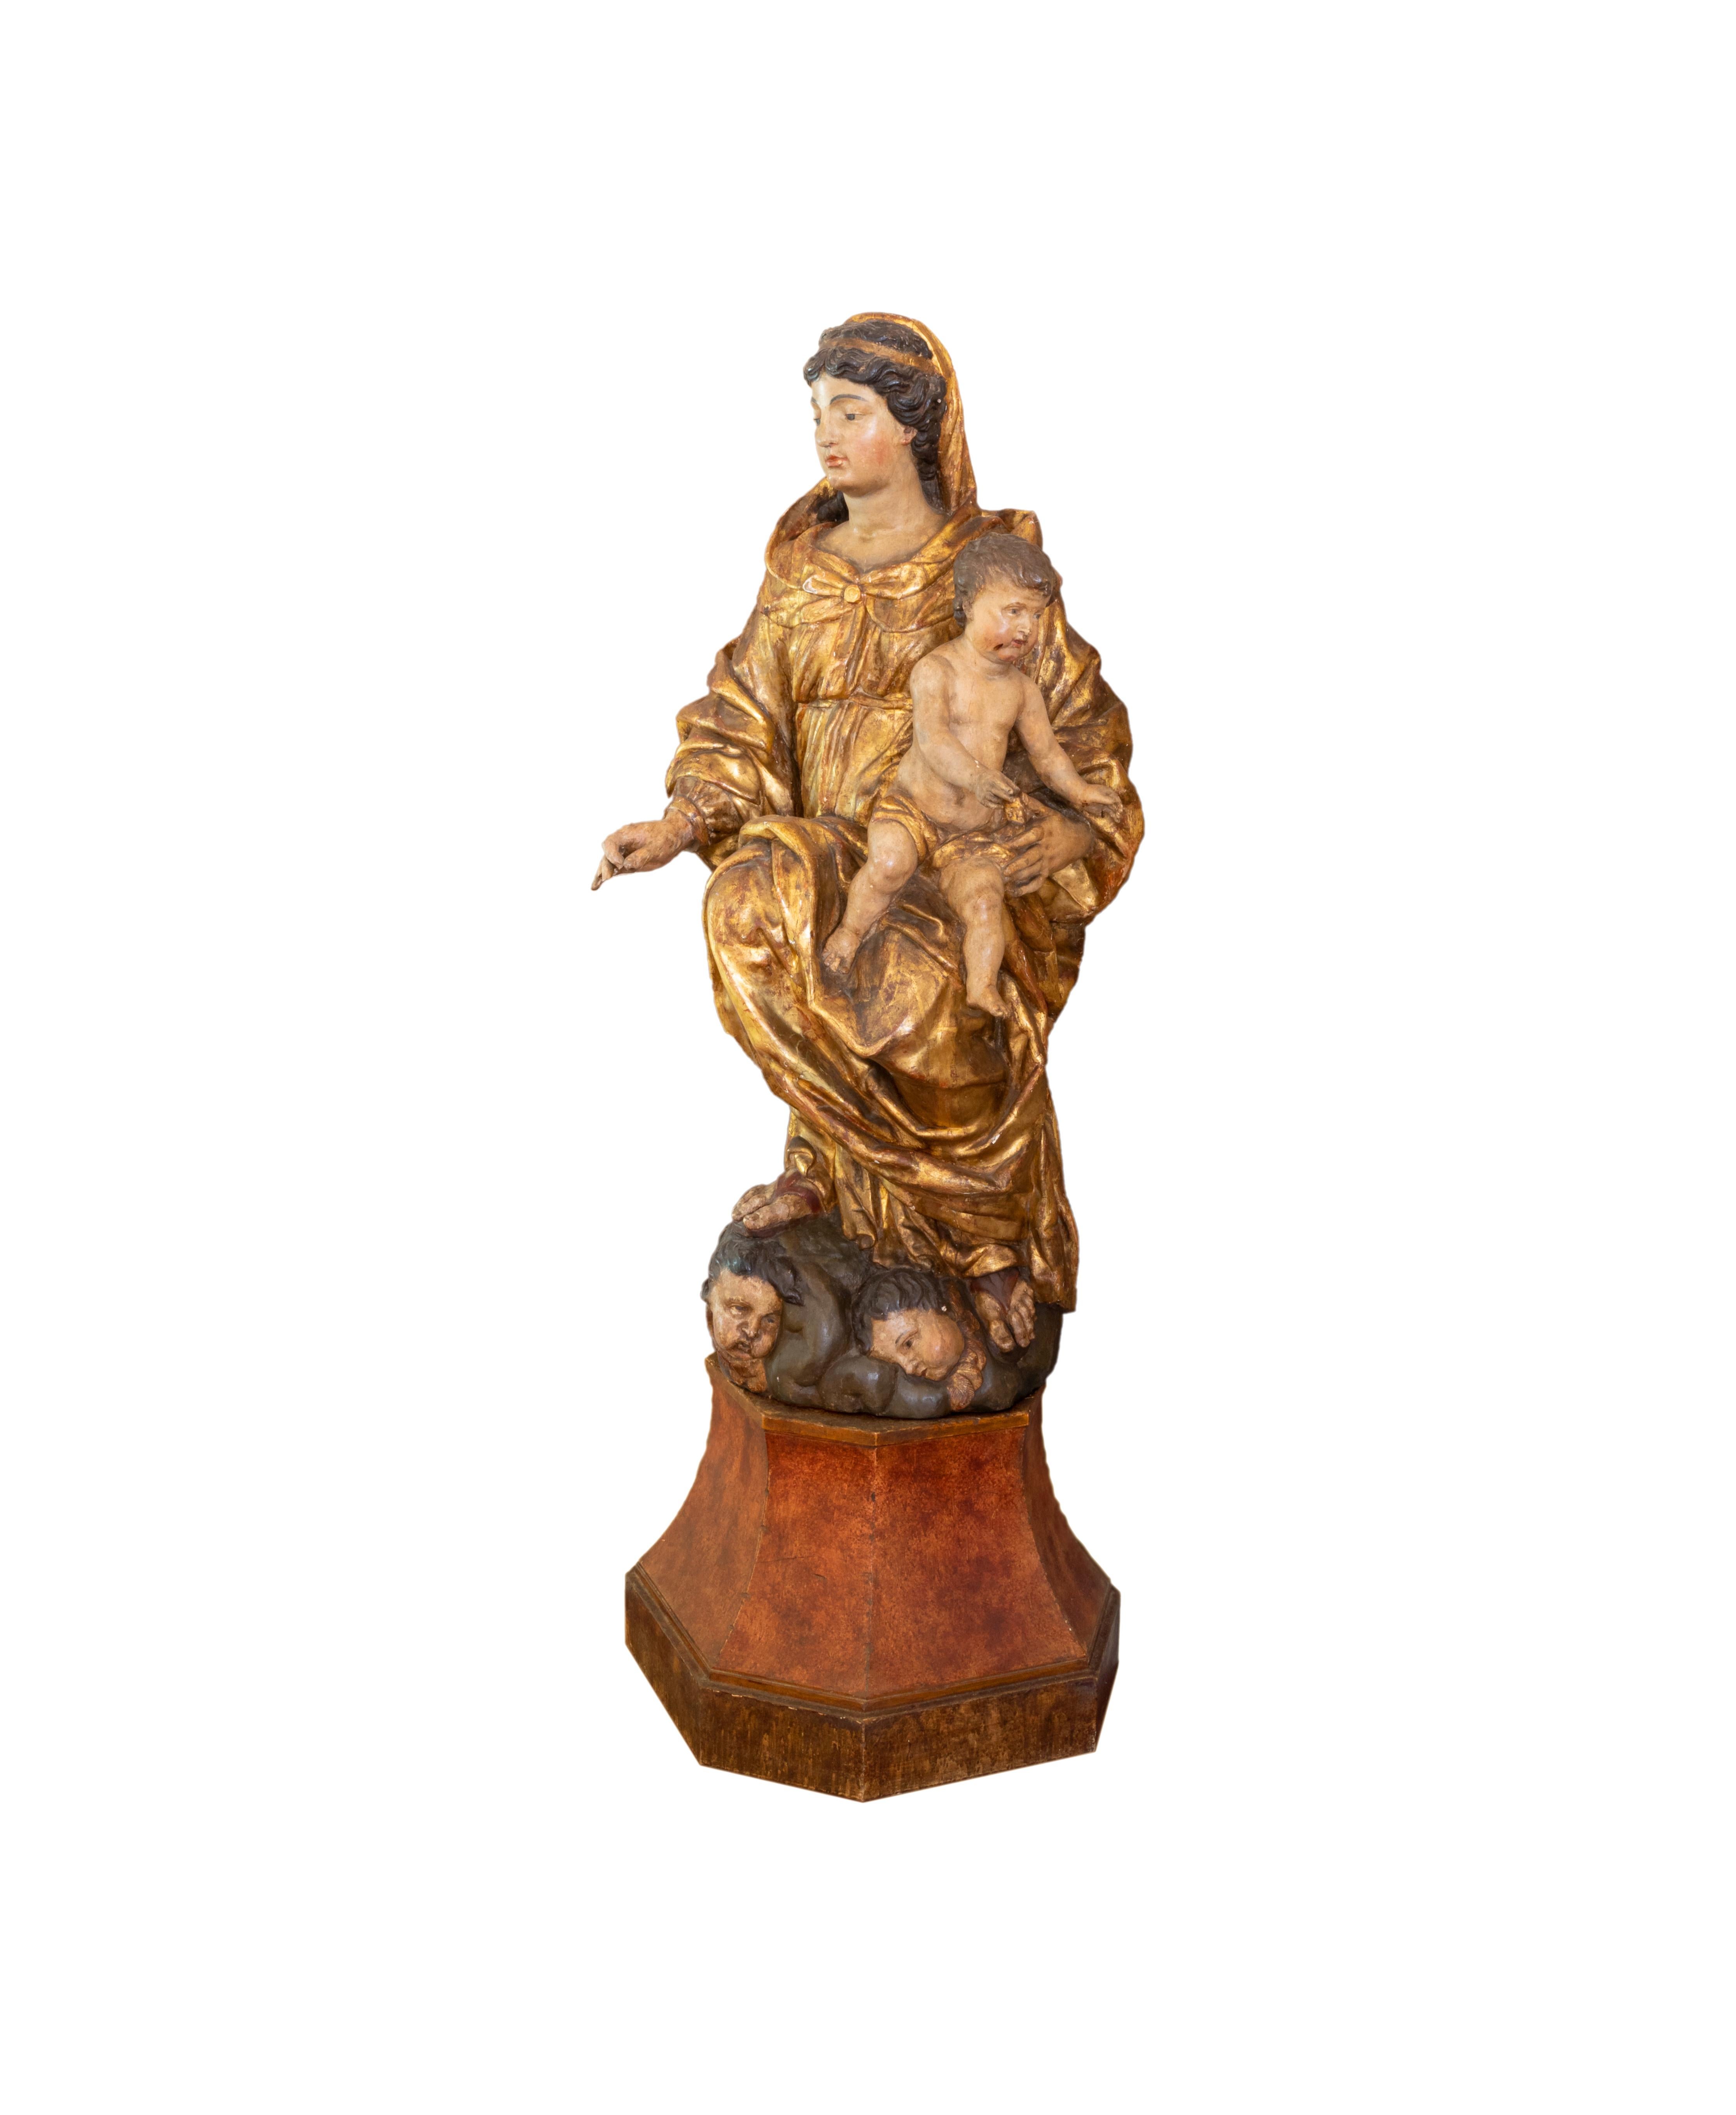 A 18th Century superb italian sculpture of a draped Madonna with a veil, base with richly carved relief with cherubs and a baby Jesus on her lap in carved polychrome and gilded wood. The scale, presence and skillful built of the sculpture impose the